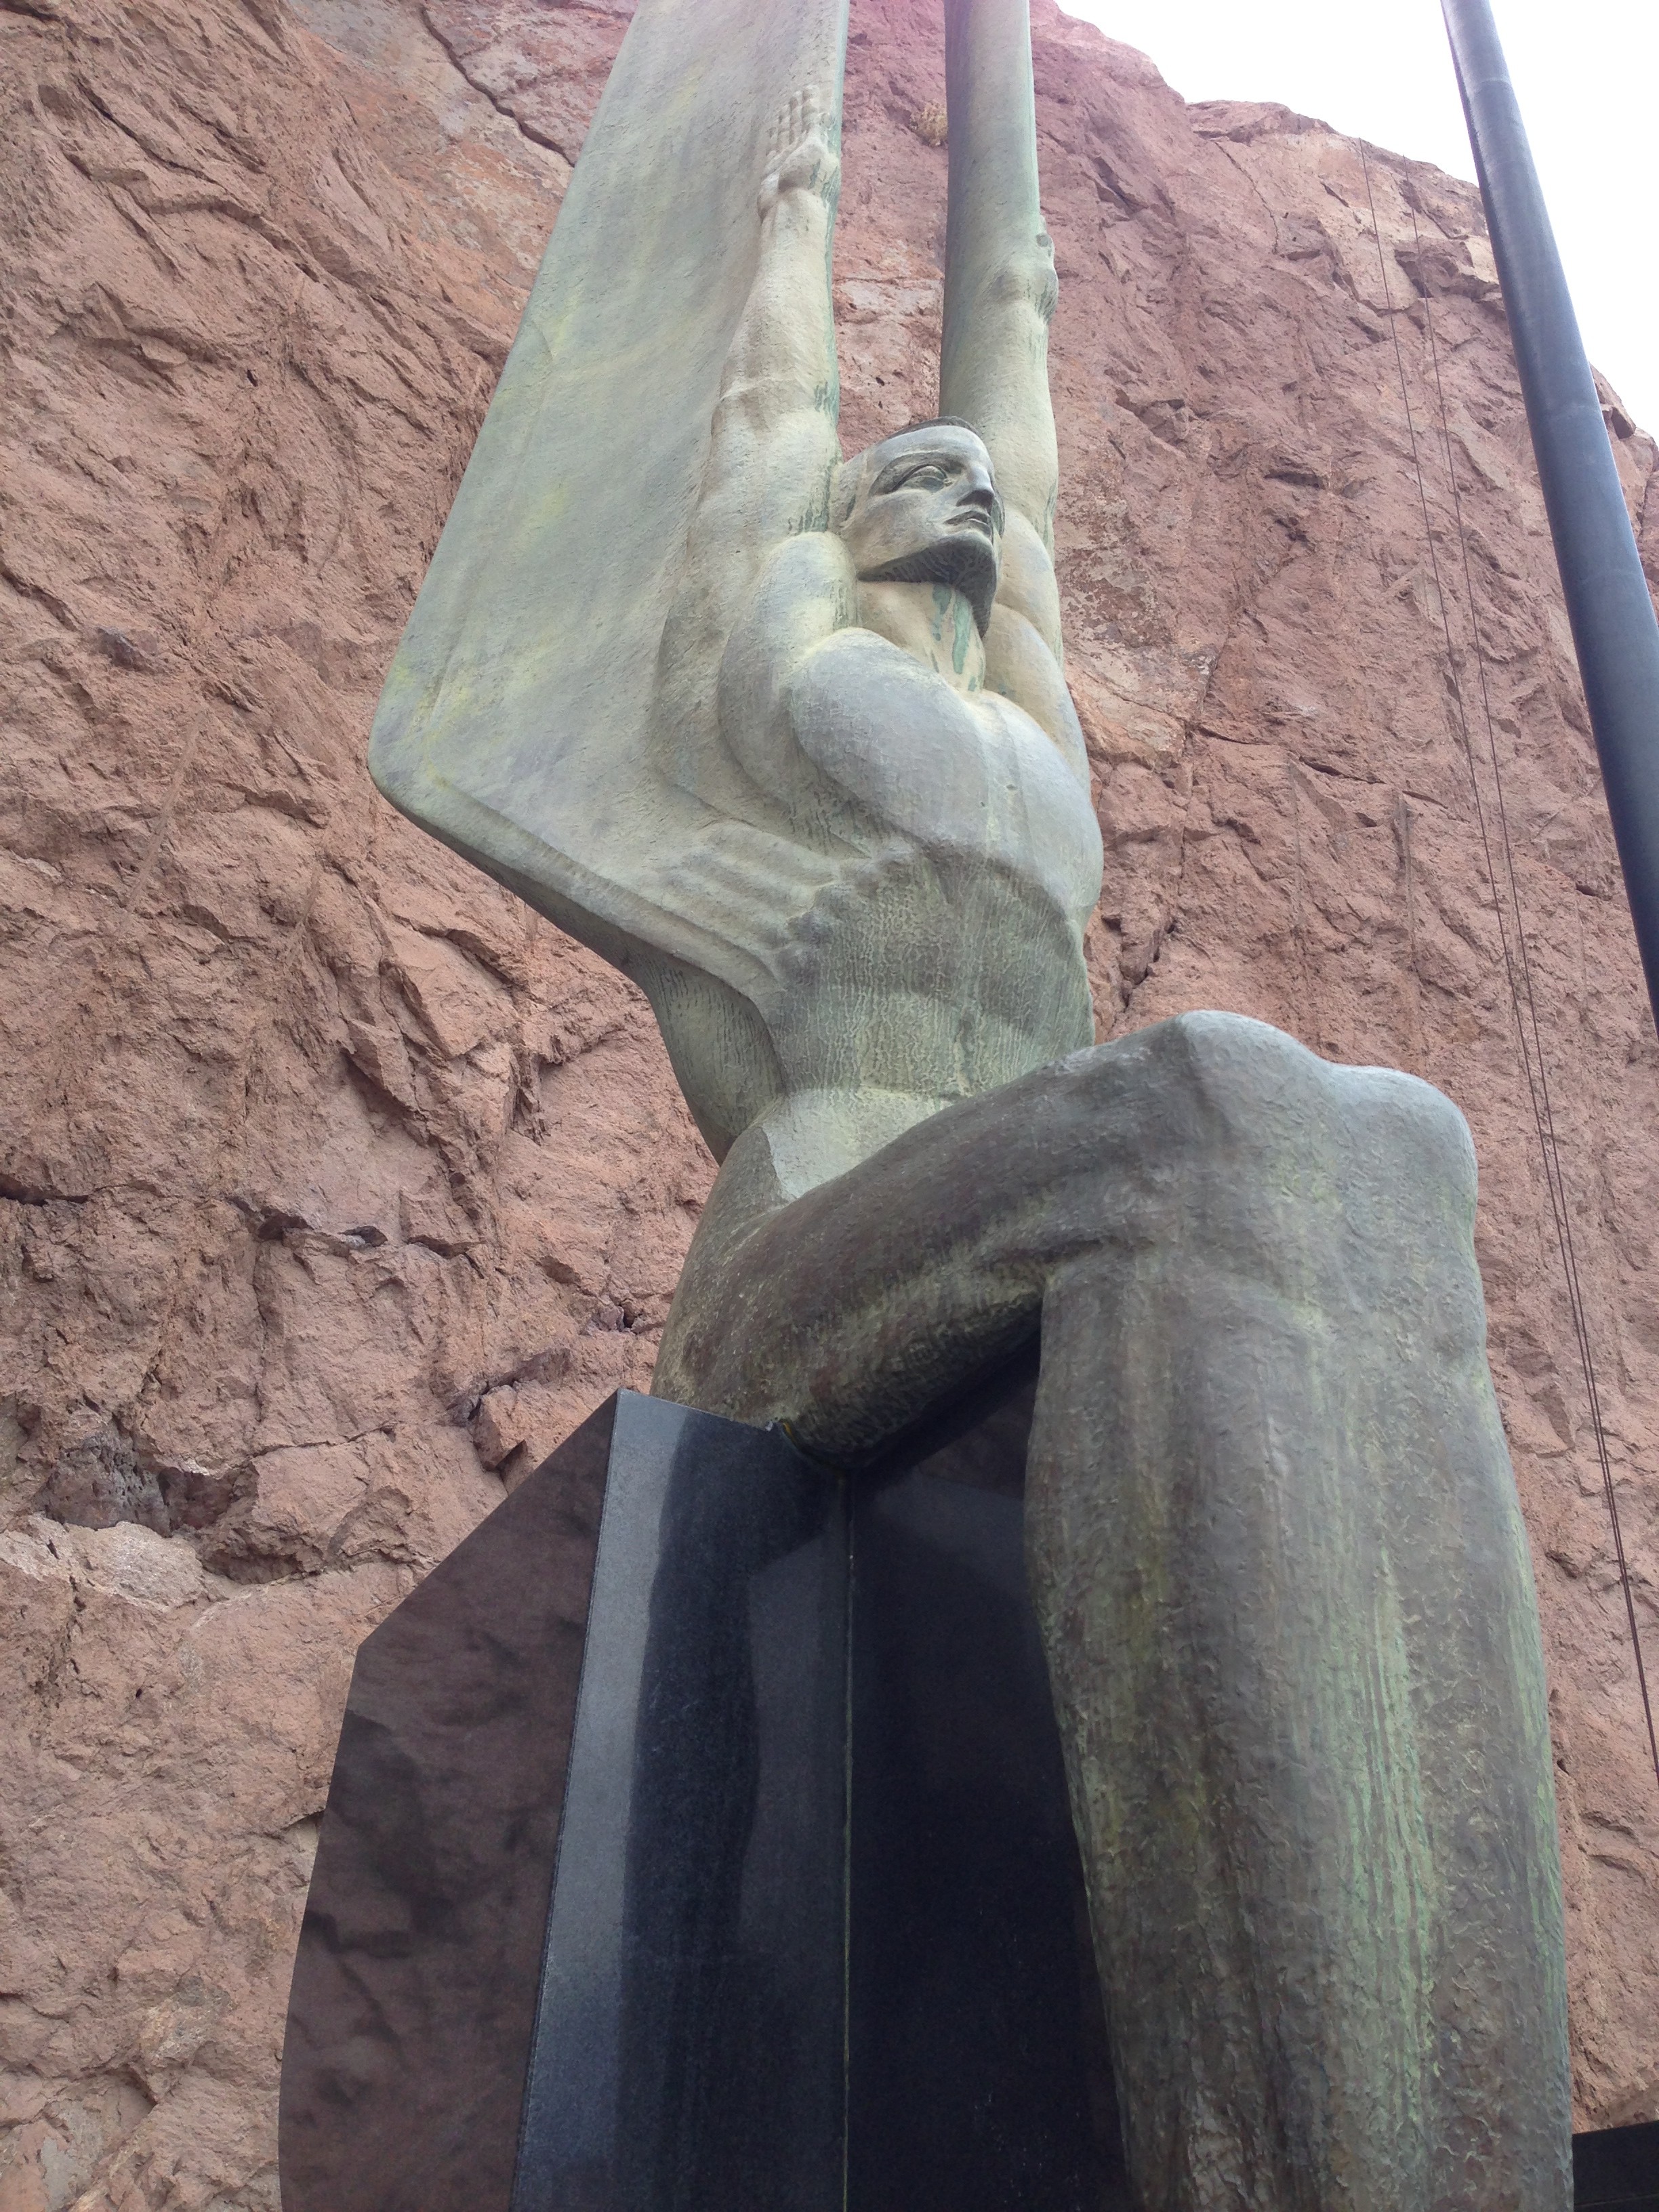 One of the figures at the Hoover Dam - I LOVE ART DECO!